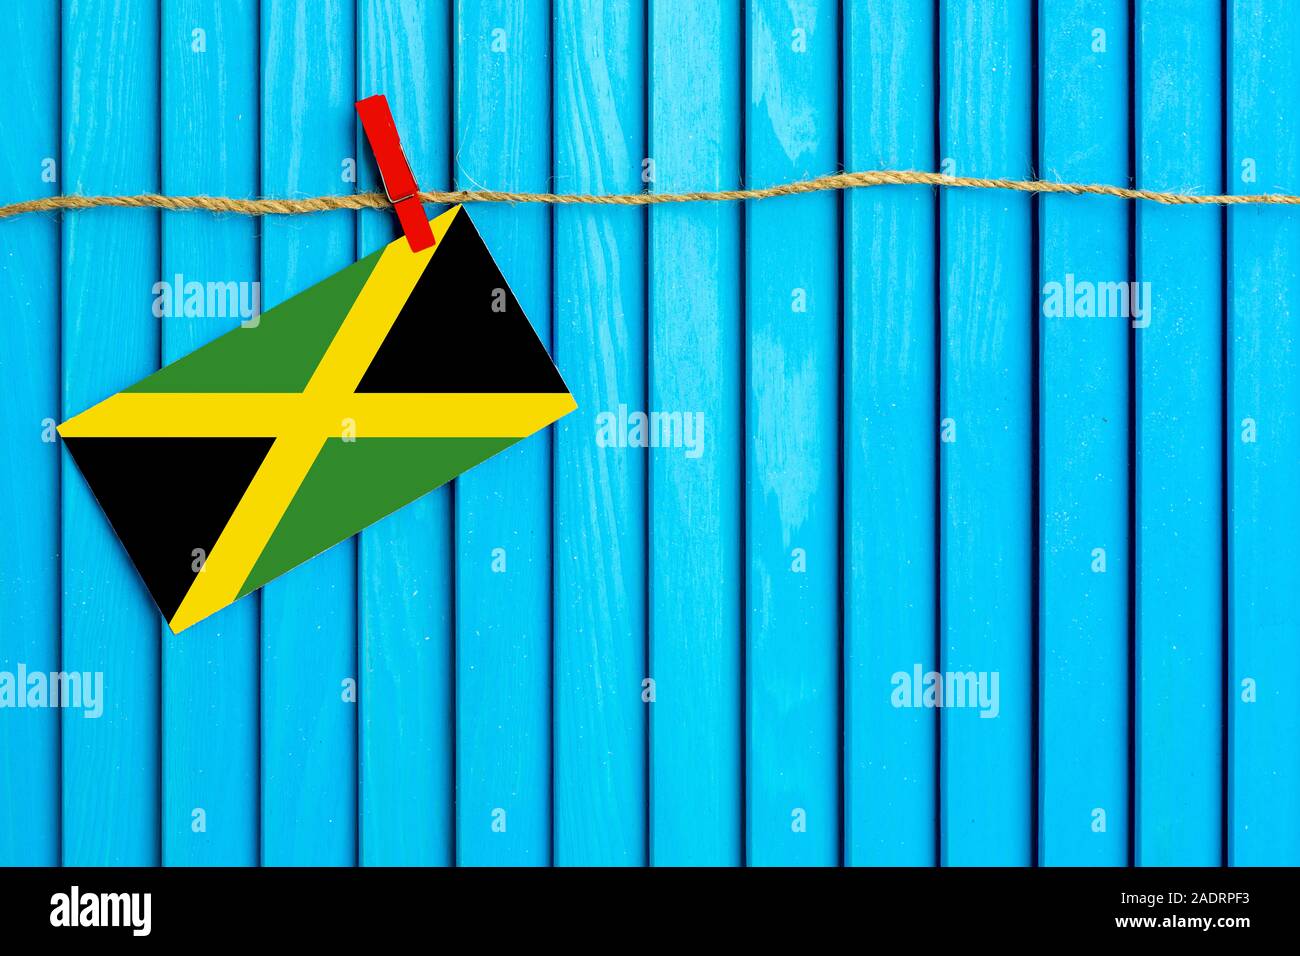 Flag of Jamaica hanging on clothesline attached with wooden clothespins on aqua blue wooden background. National day concept. Stock Photo